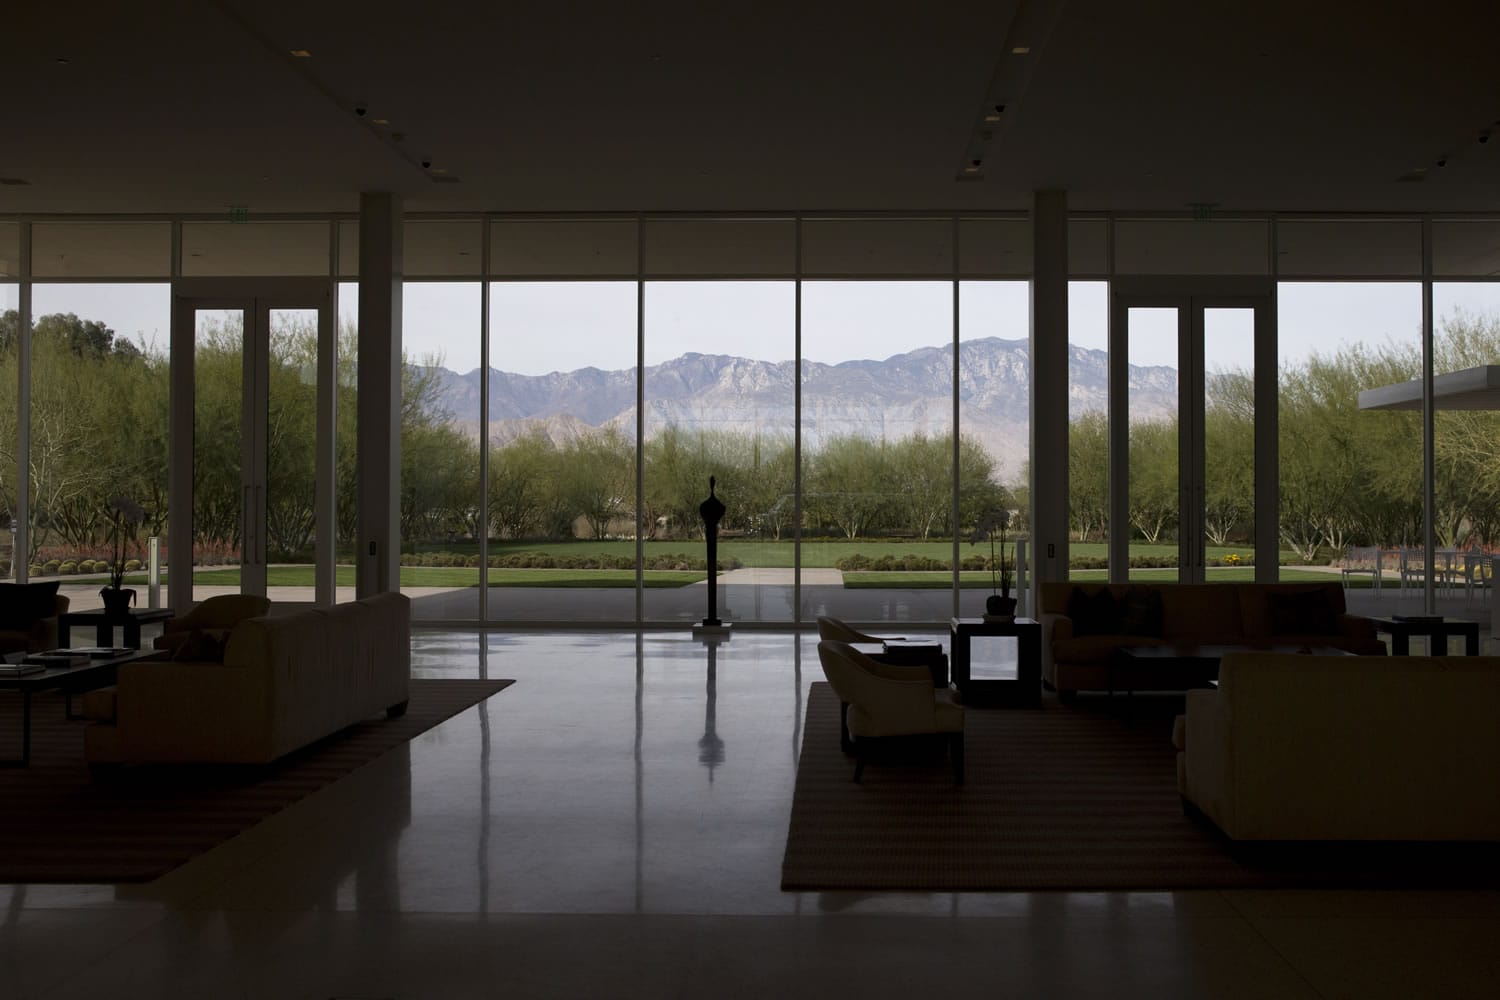 The view from inside the Sunnylands Center &amp; Gardens at The Annenberg Retreat at Sunnylands, Rancho Mirage, Calif.